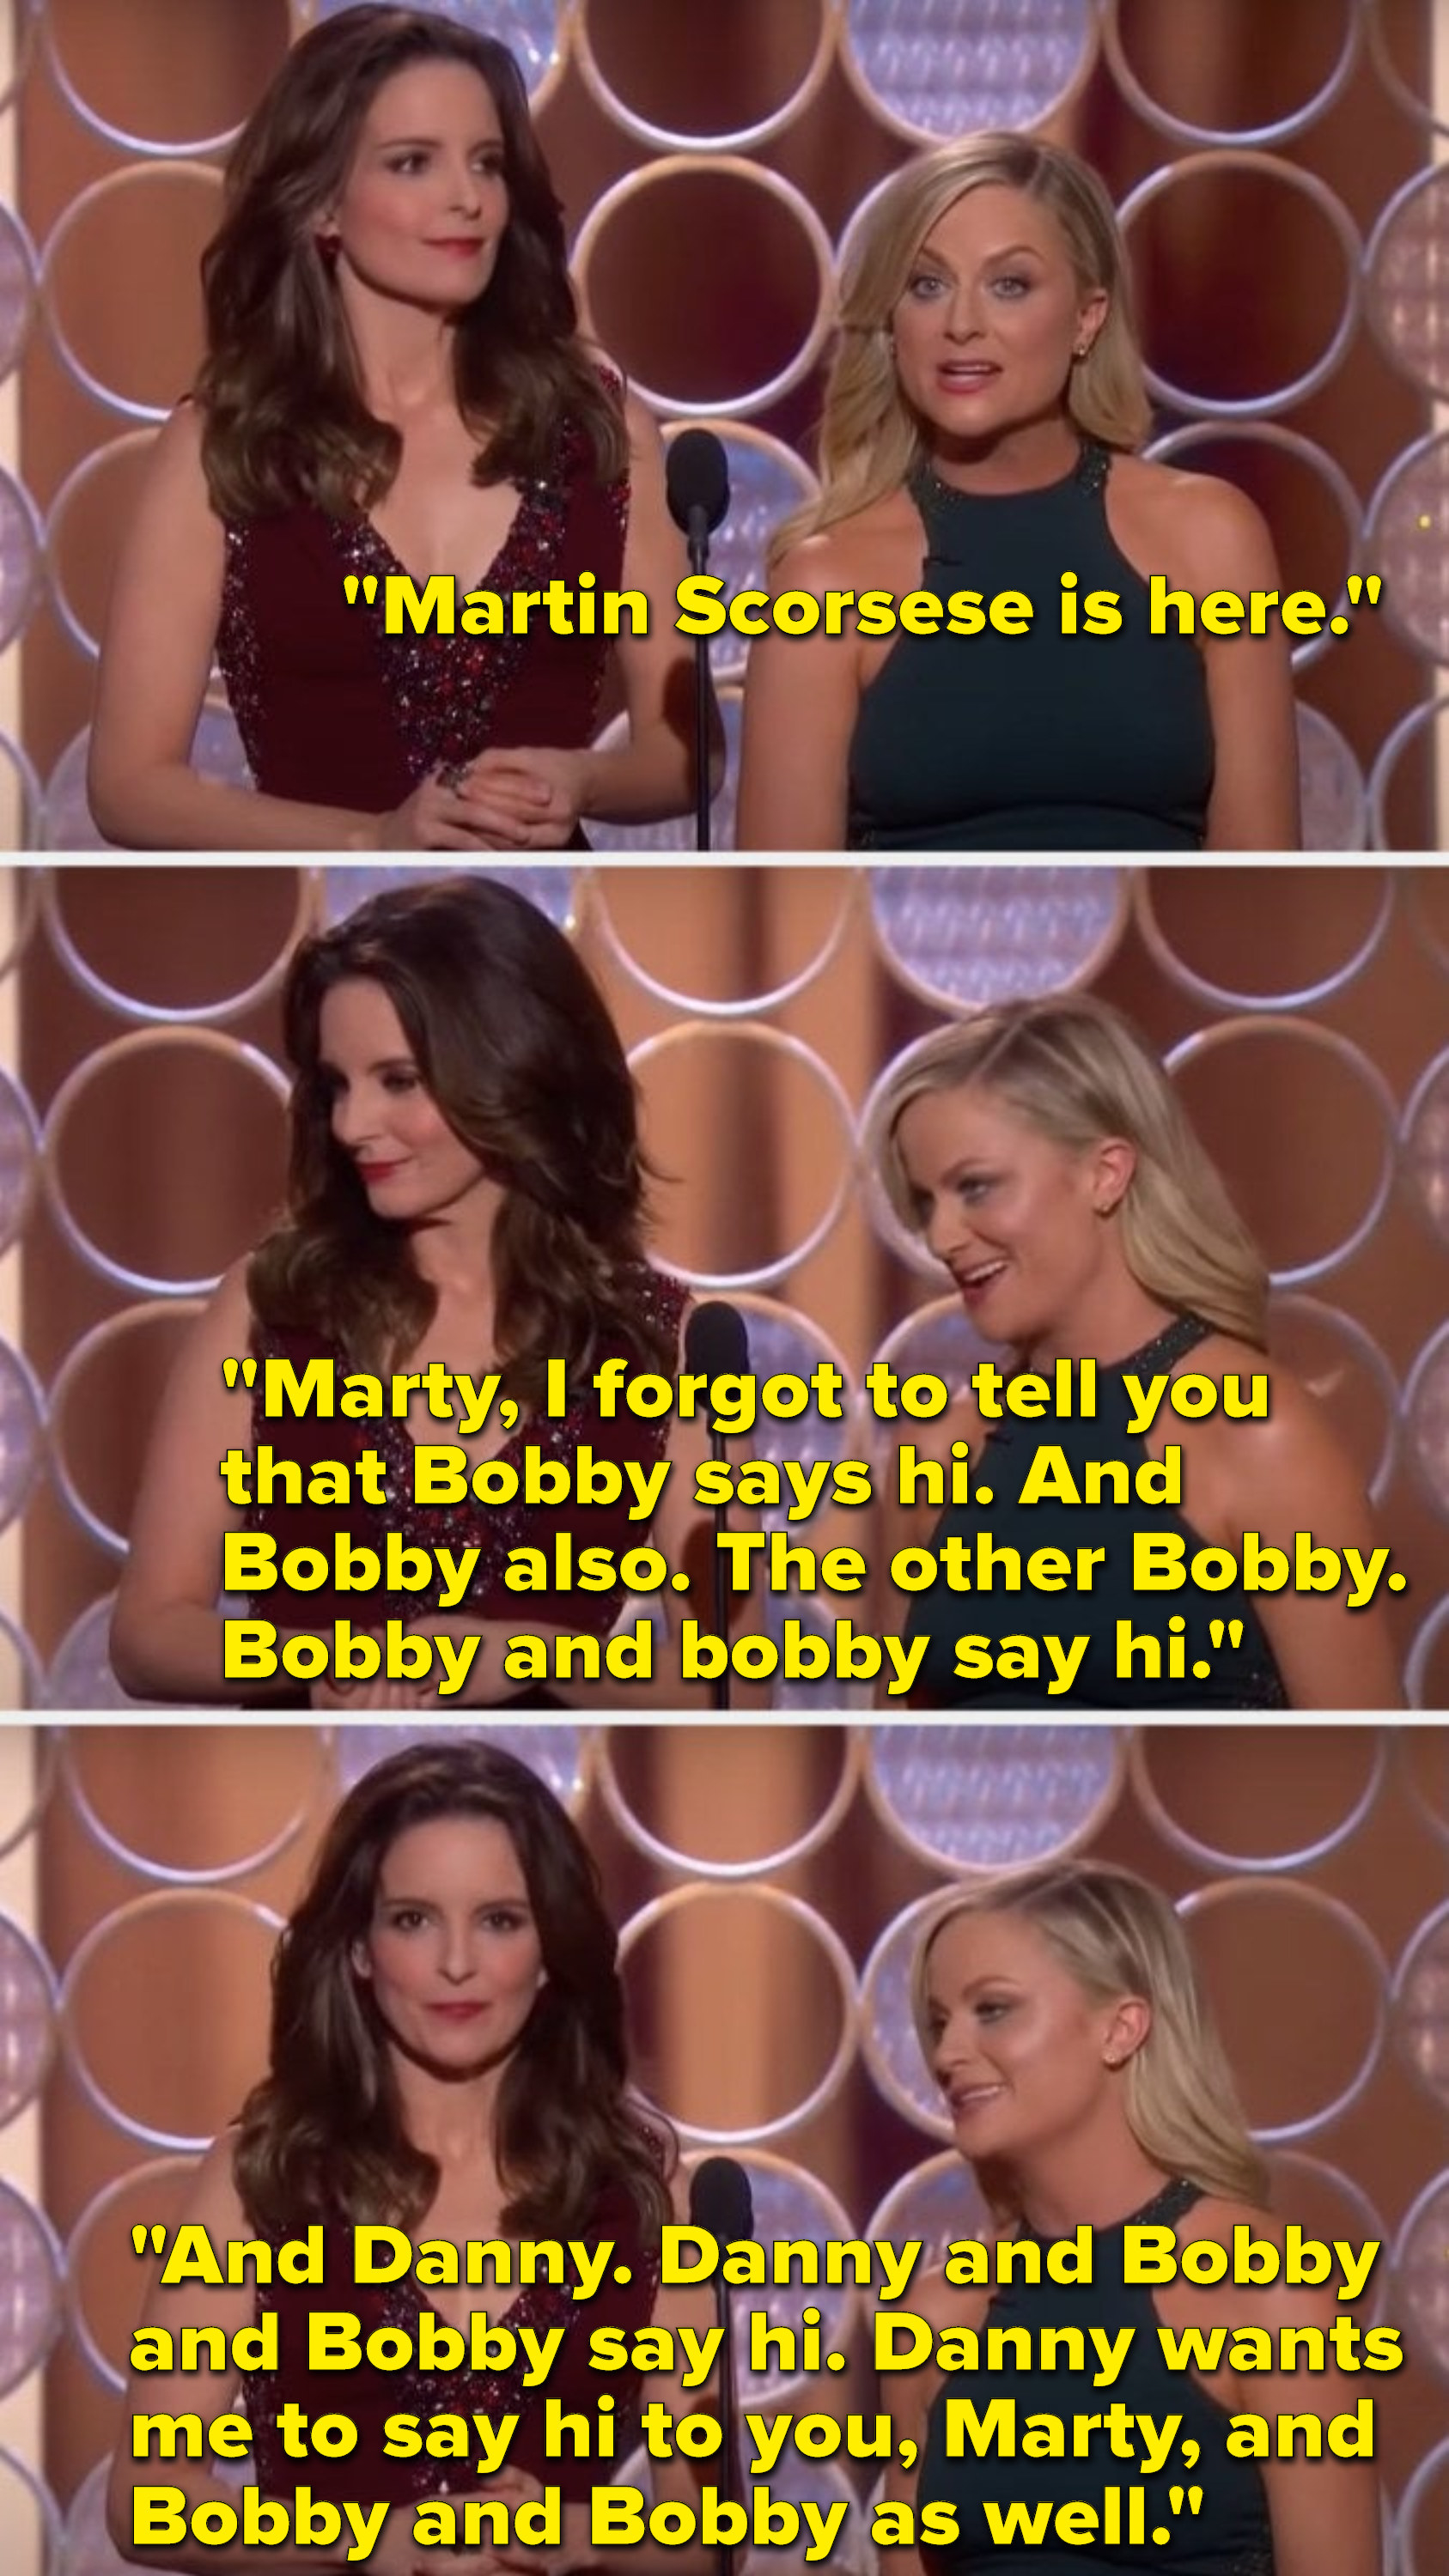 Poehler says, &quot;Martin Scorsese is here, Marty, I forgot to tell you Bobby says hi, and Bobby also, the other Bobby, Bobby and bobby say hi, and Danny, Danny and Bobby and Bobby say hi, Danny wants me to say hi to you, Marty, and Bobby and Bobby as well&quot;